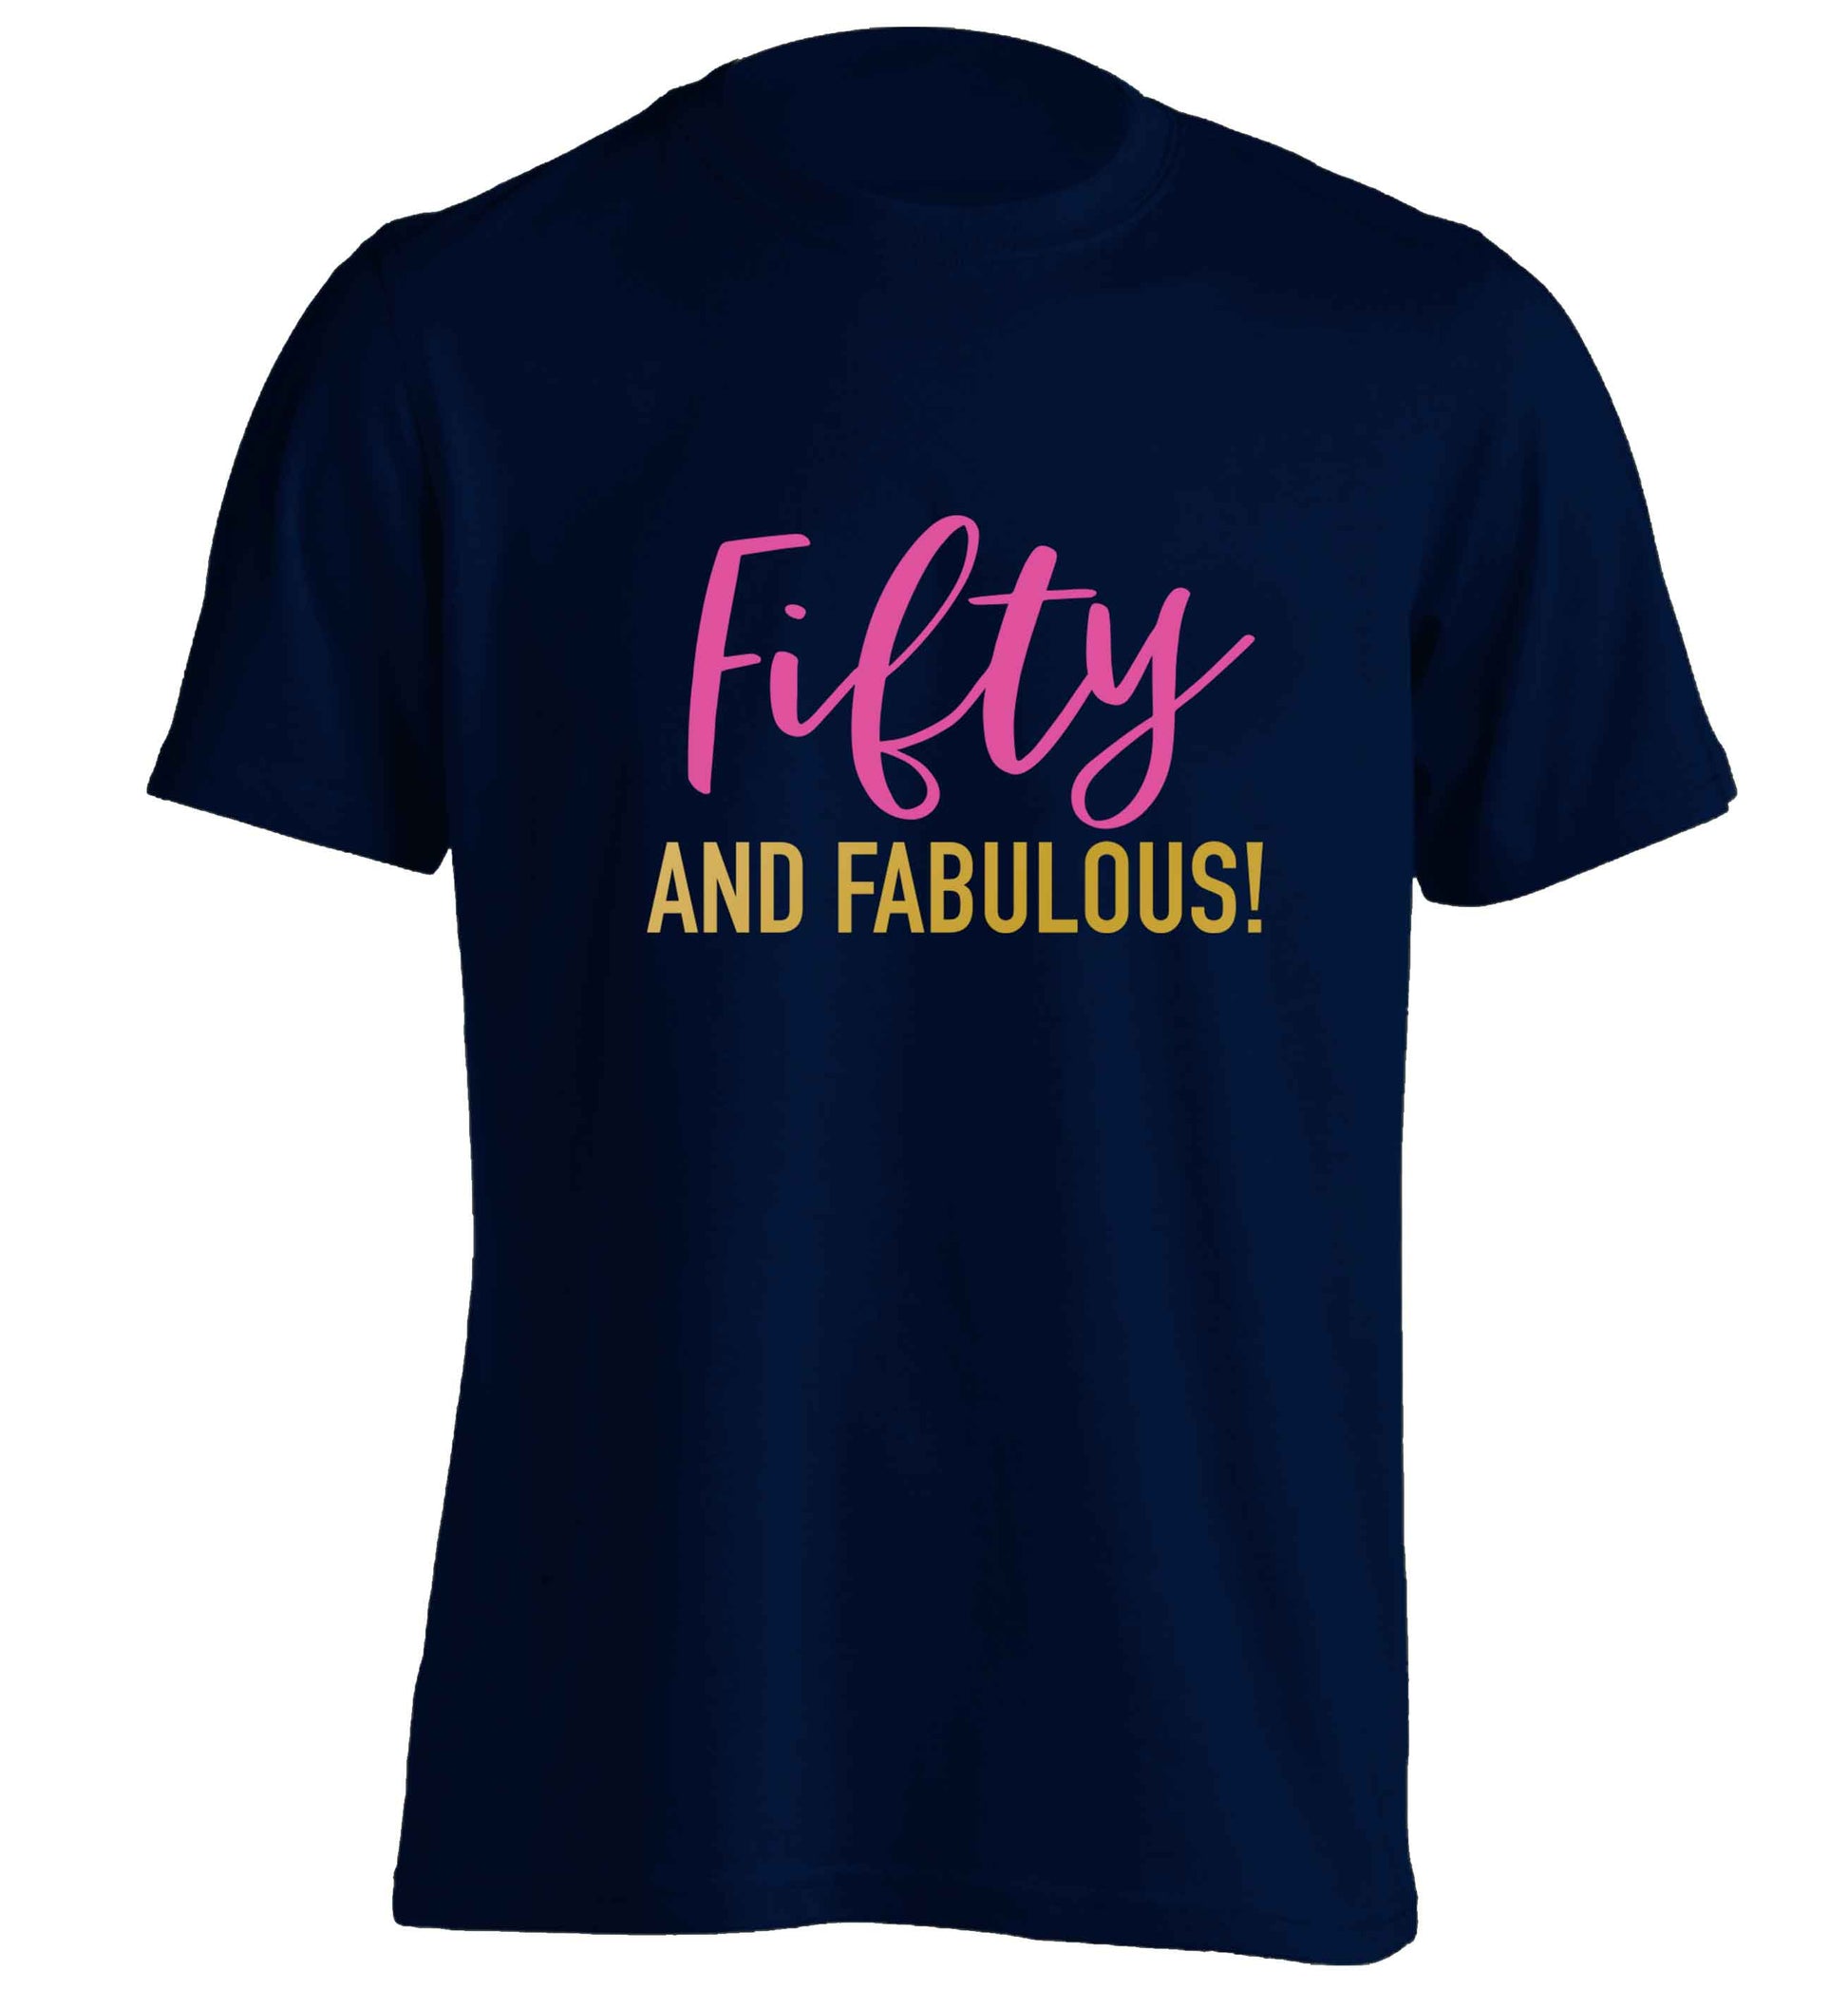 Fifty and fabulous adults unisex navy Tshirt 2XL